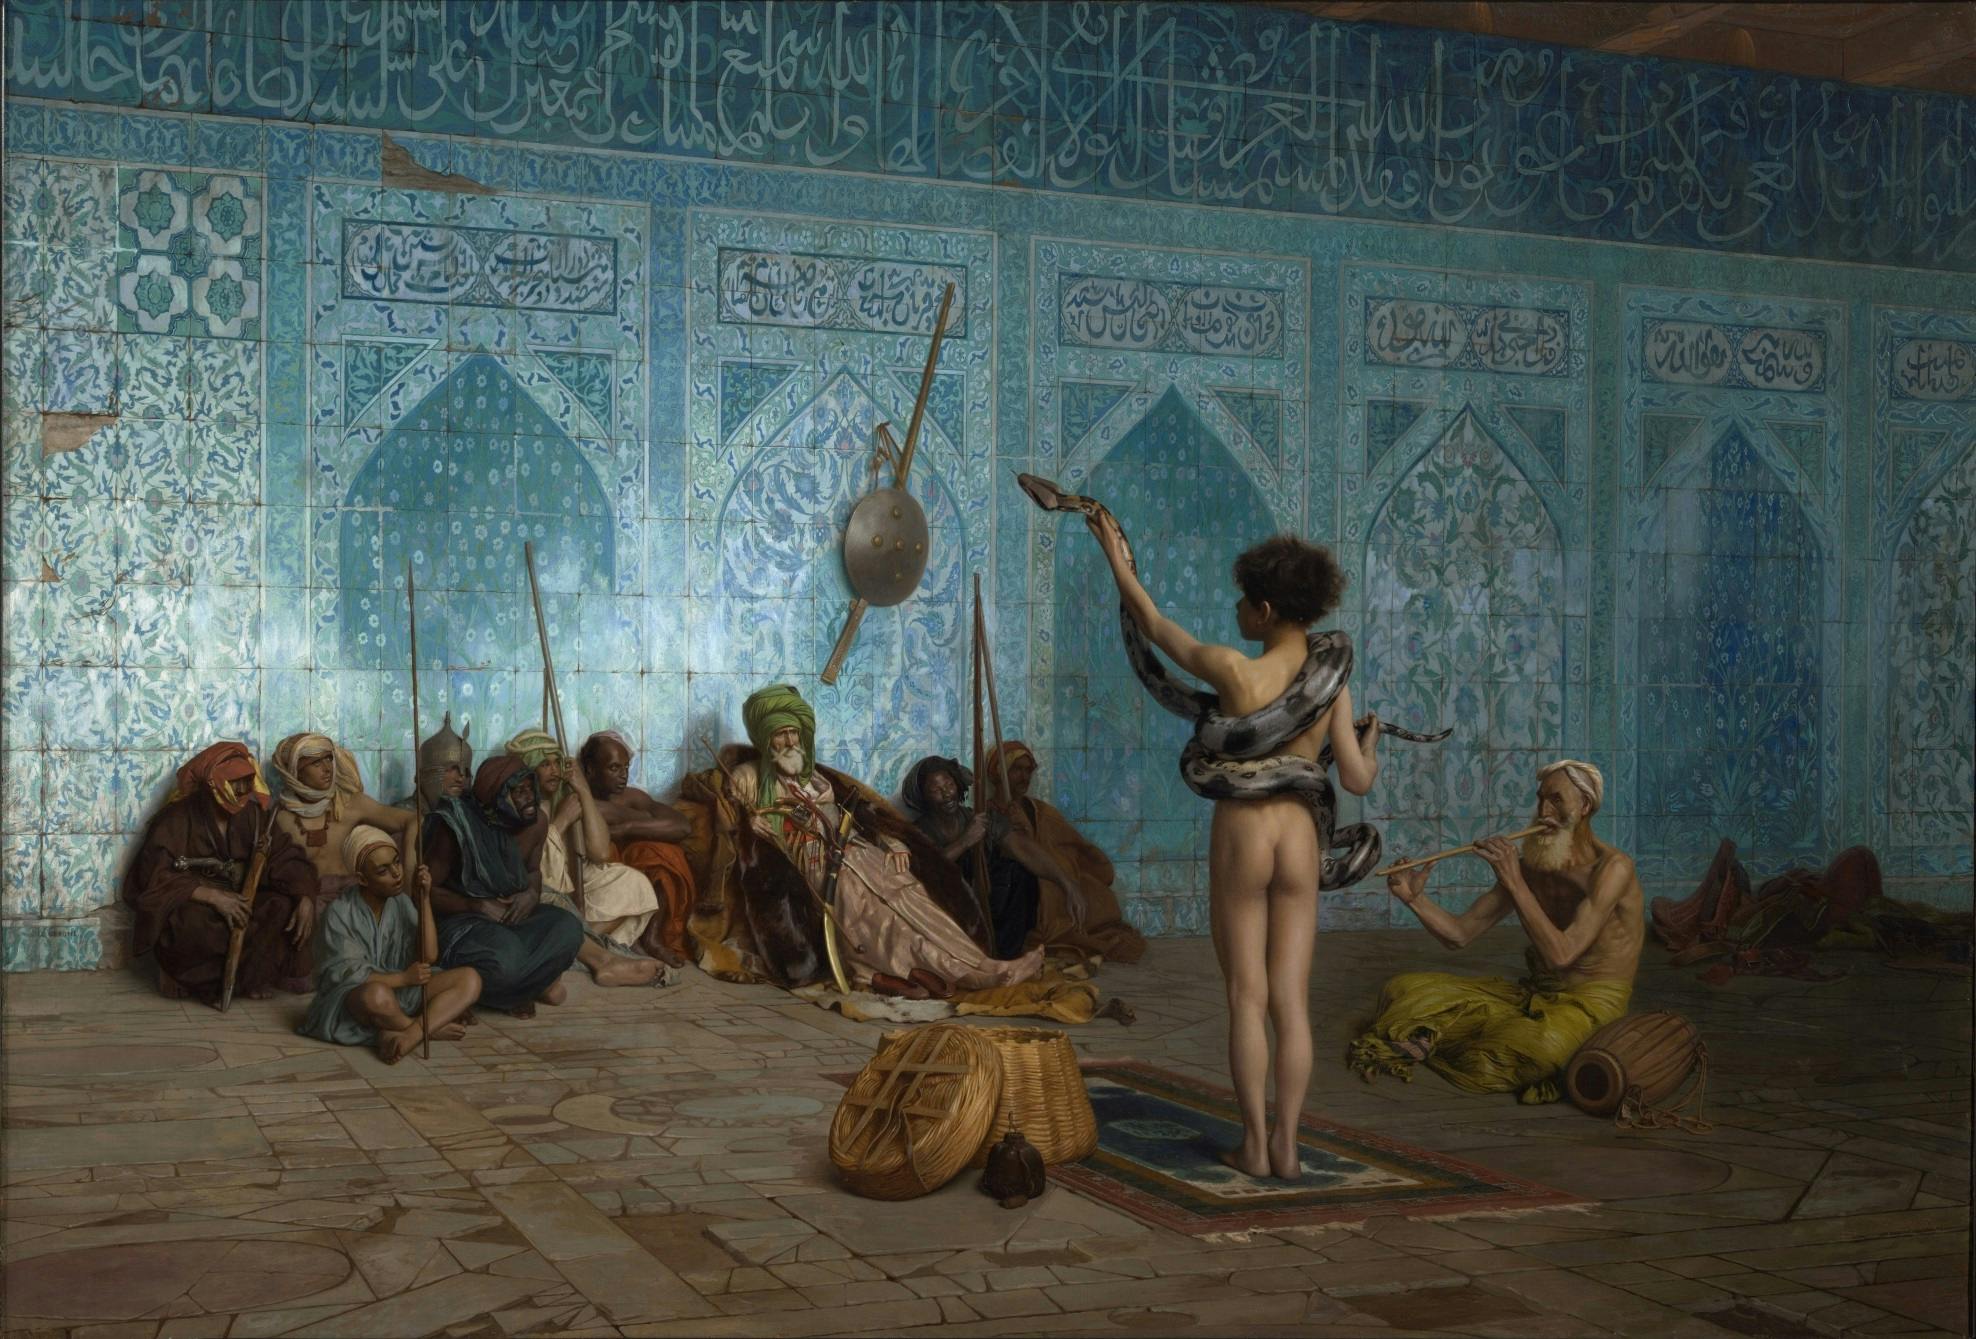 “The Snake Charmer” is an orientalist 19th century painting by French artist Jean-Léon Gérôme. (Wikimedia)